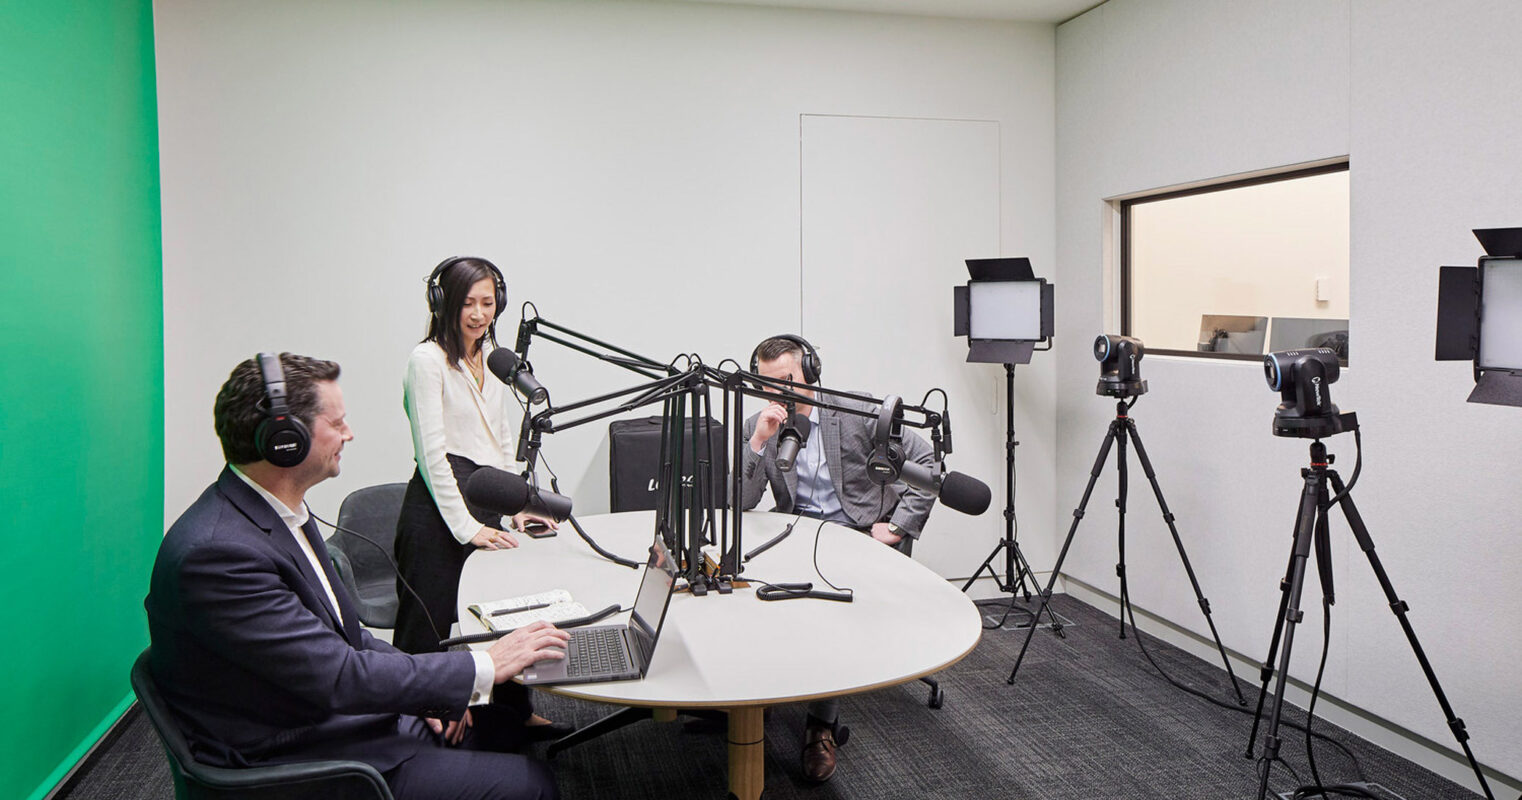 Minimalist podcast studio design with a neutral color palette, featuring soundproofed walls, modern broadcasting equipment, and ergonomic seating for three hosts. A glass partition separates the recording area, enhancing openness while maintaining acoustic privacy.